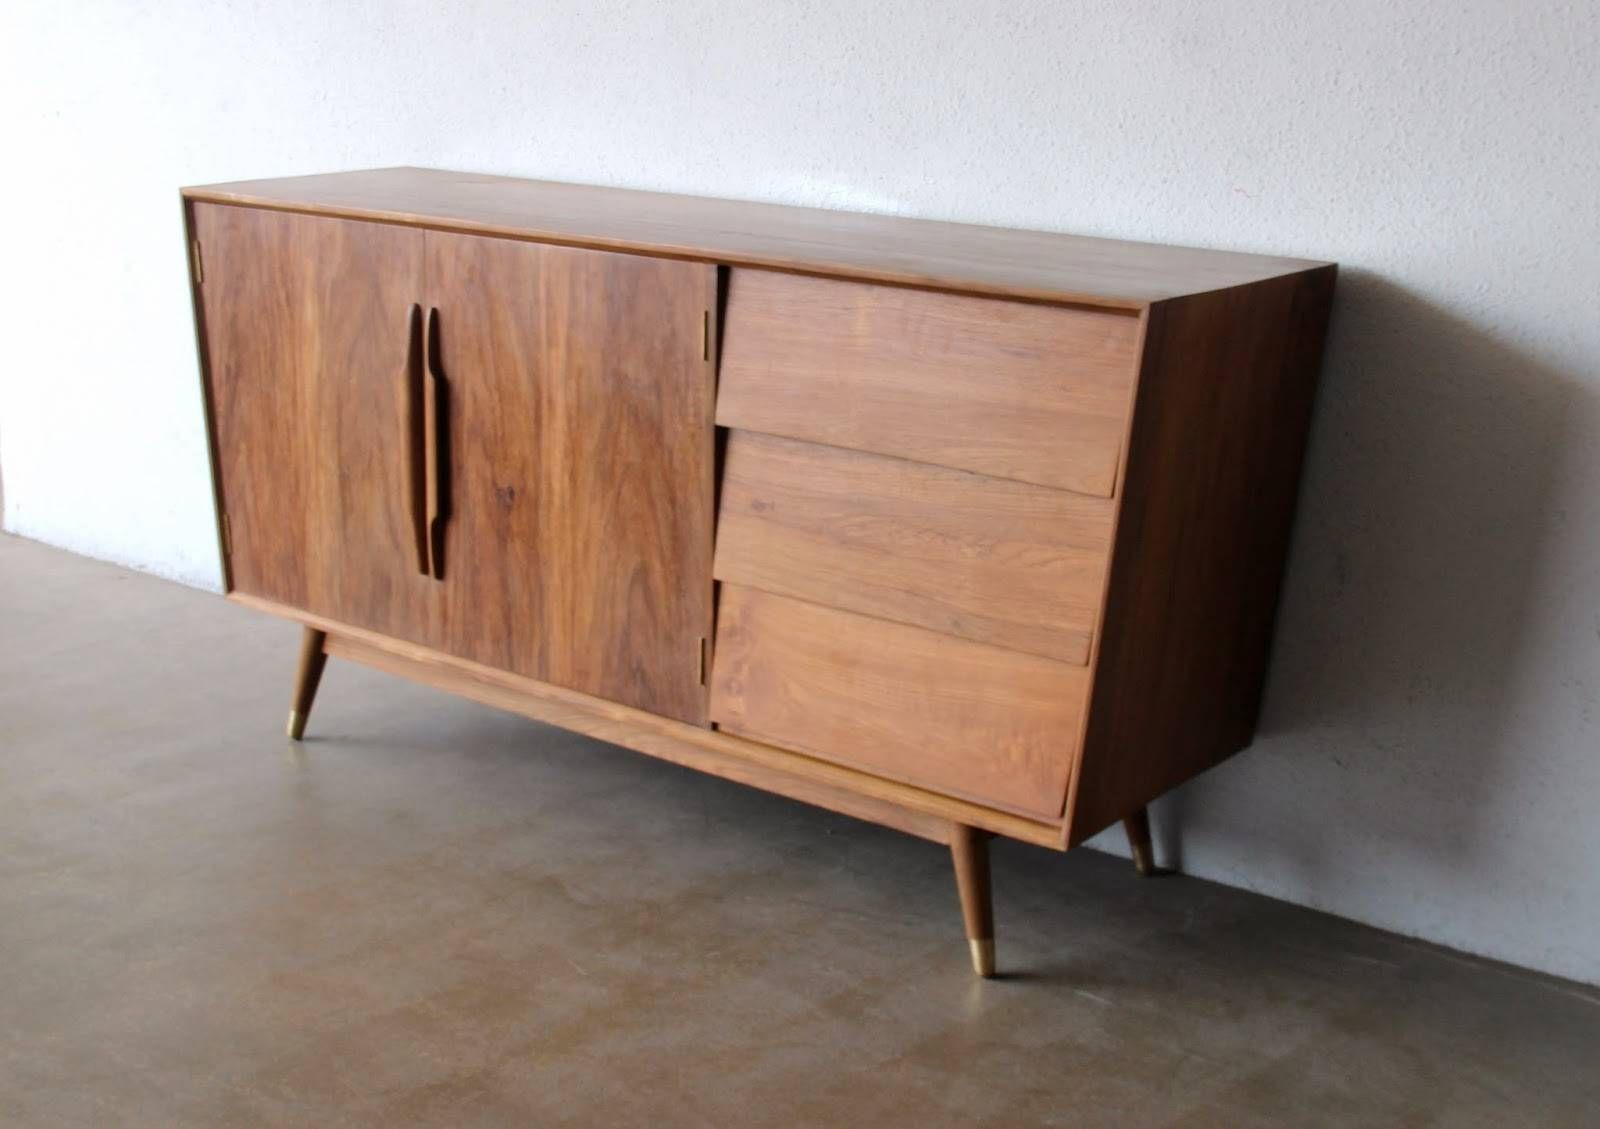 Second Charm Furniture – Mid Century Modern Influence | Bobs Furniture For Best And Newest Midcentury Sideboards (View 6 of 15)